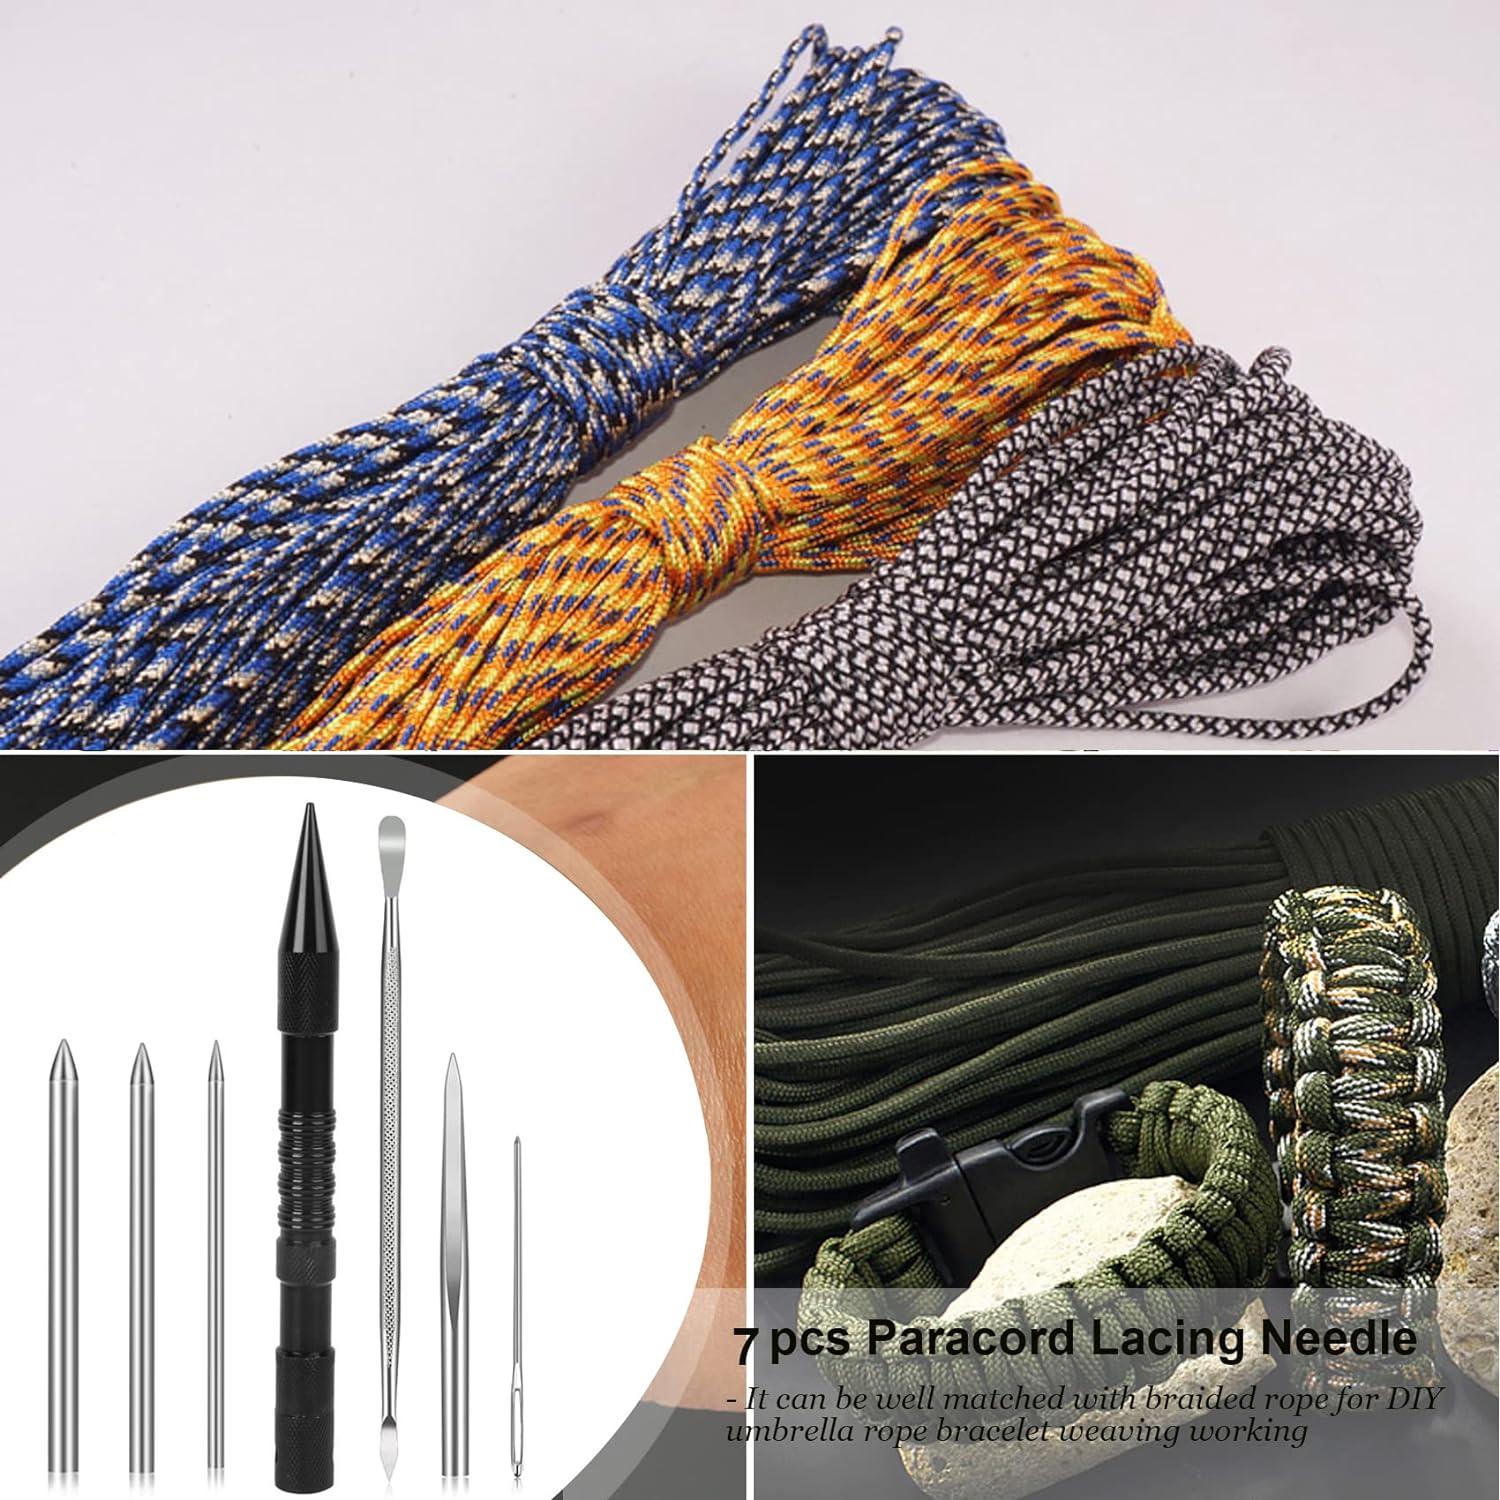  Paracord Needle, Rust Proof Convenient and Practical